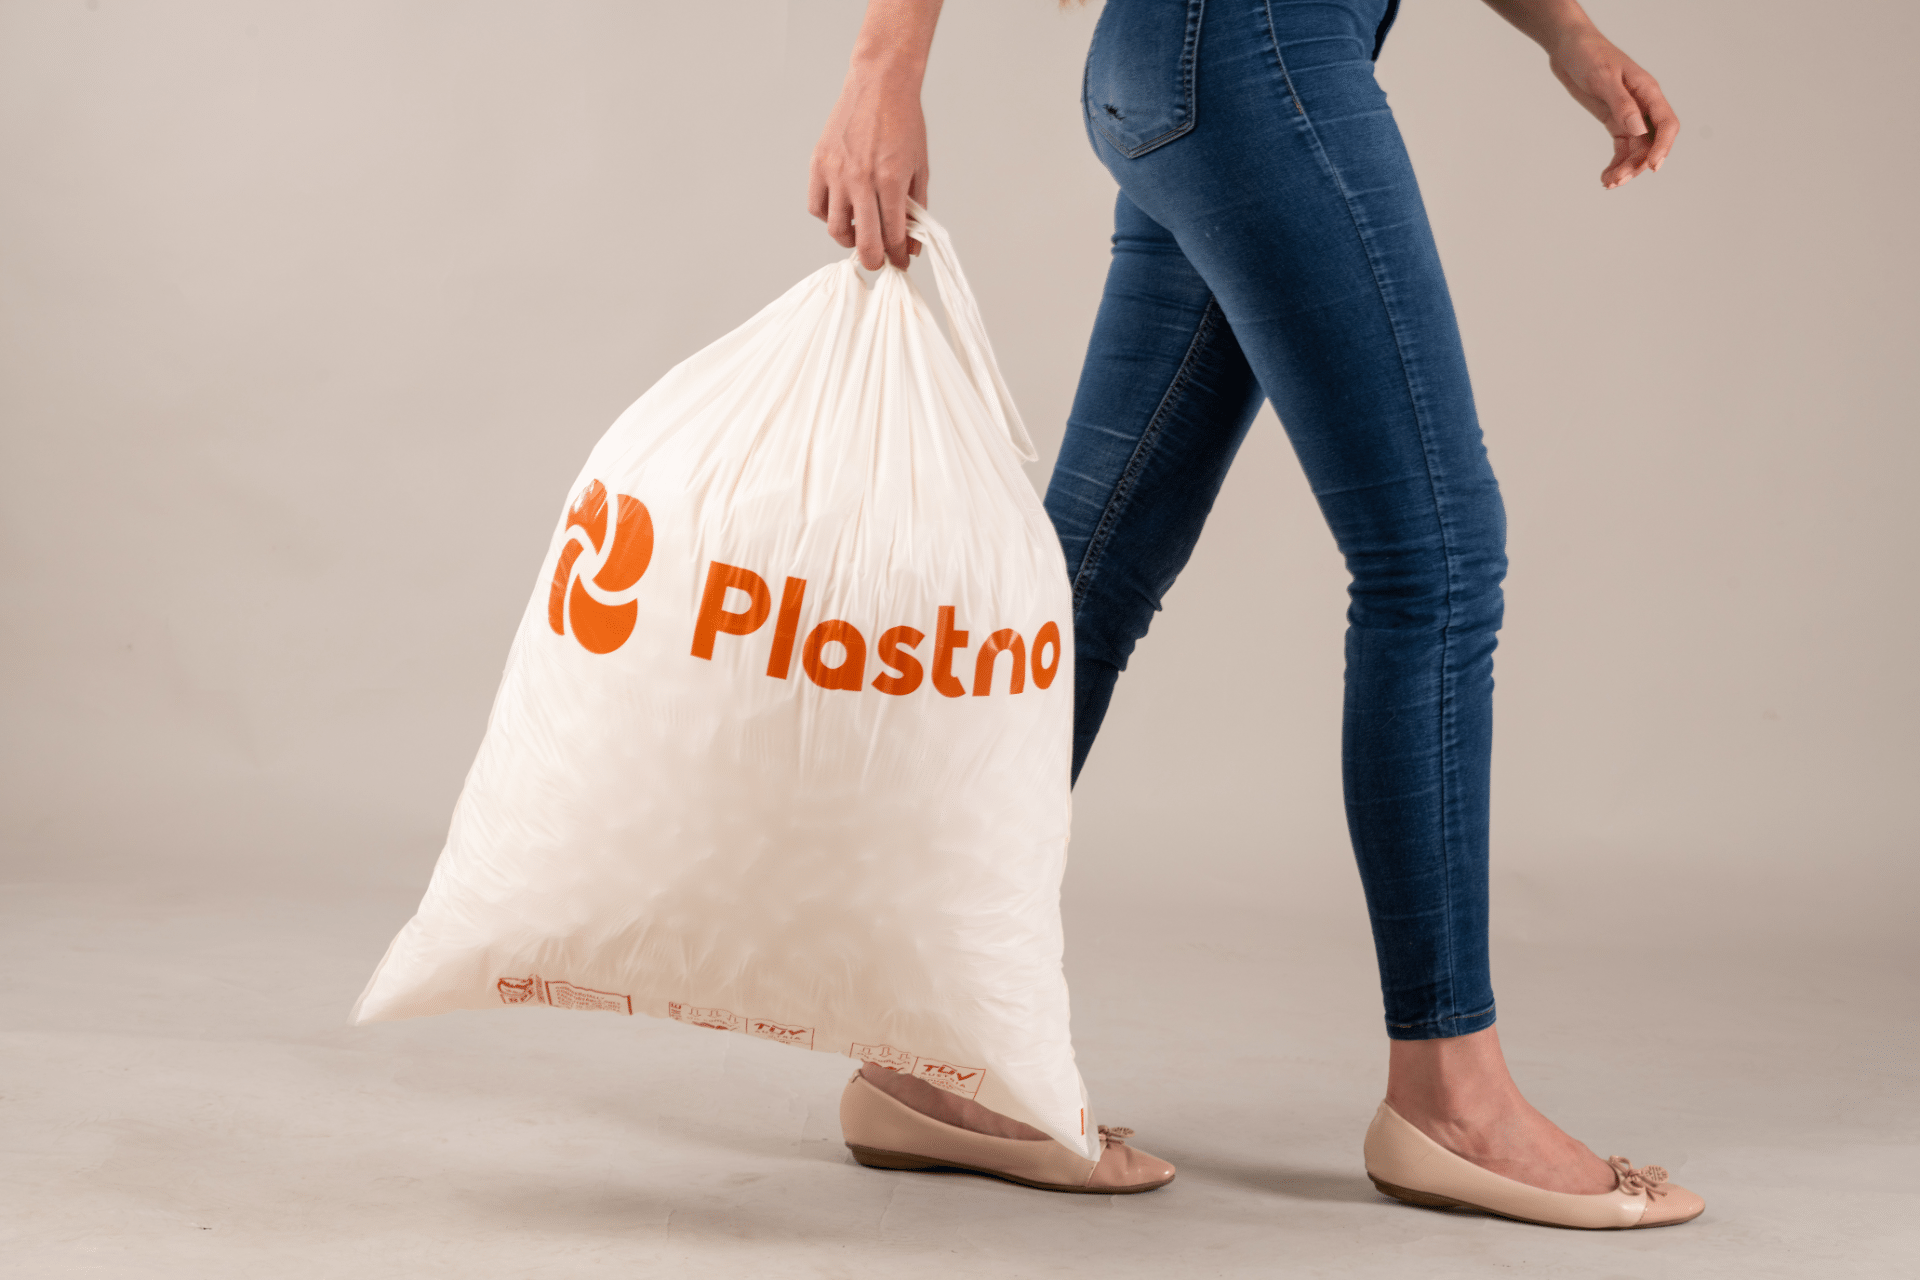 The Best Biodegradable & Compostable Trash Bags for Your Eco